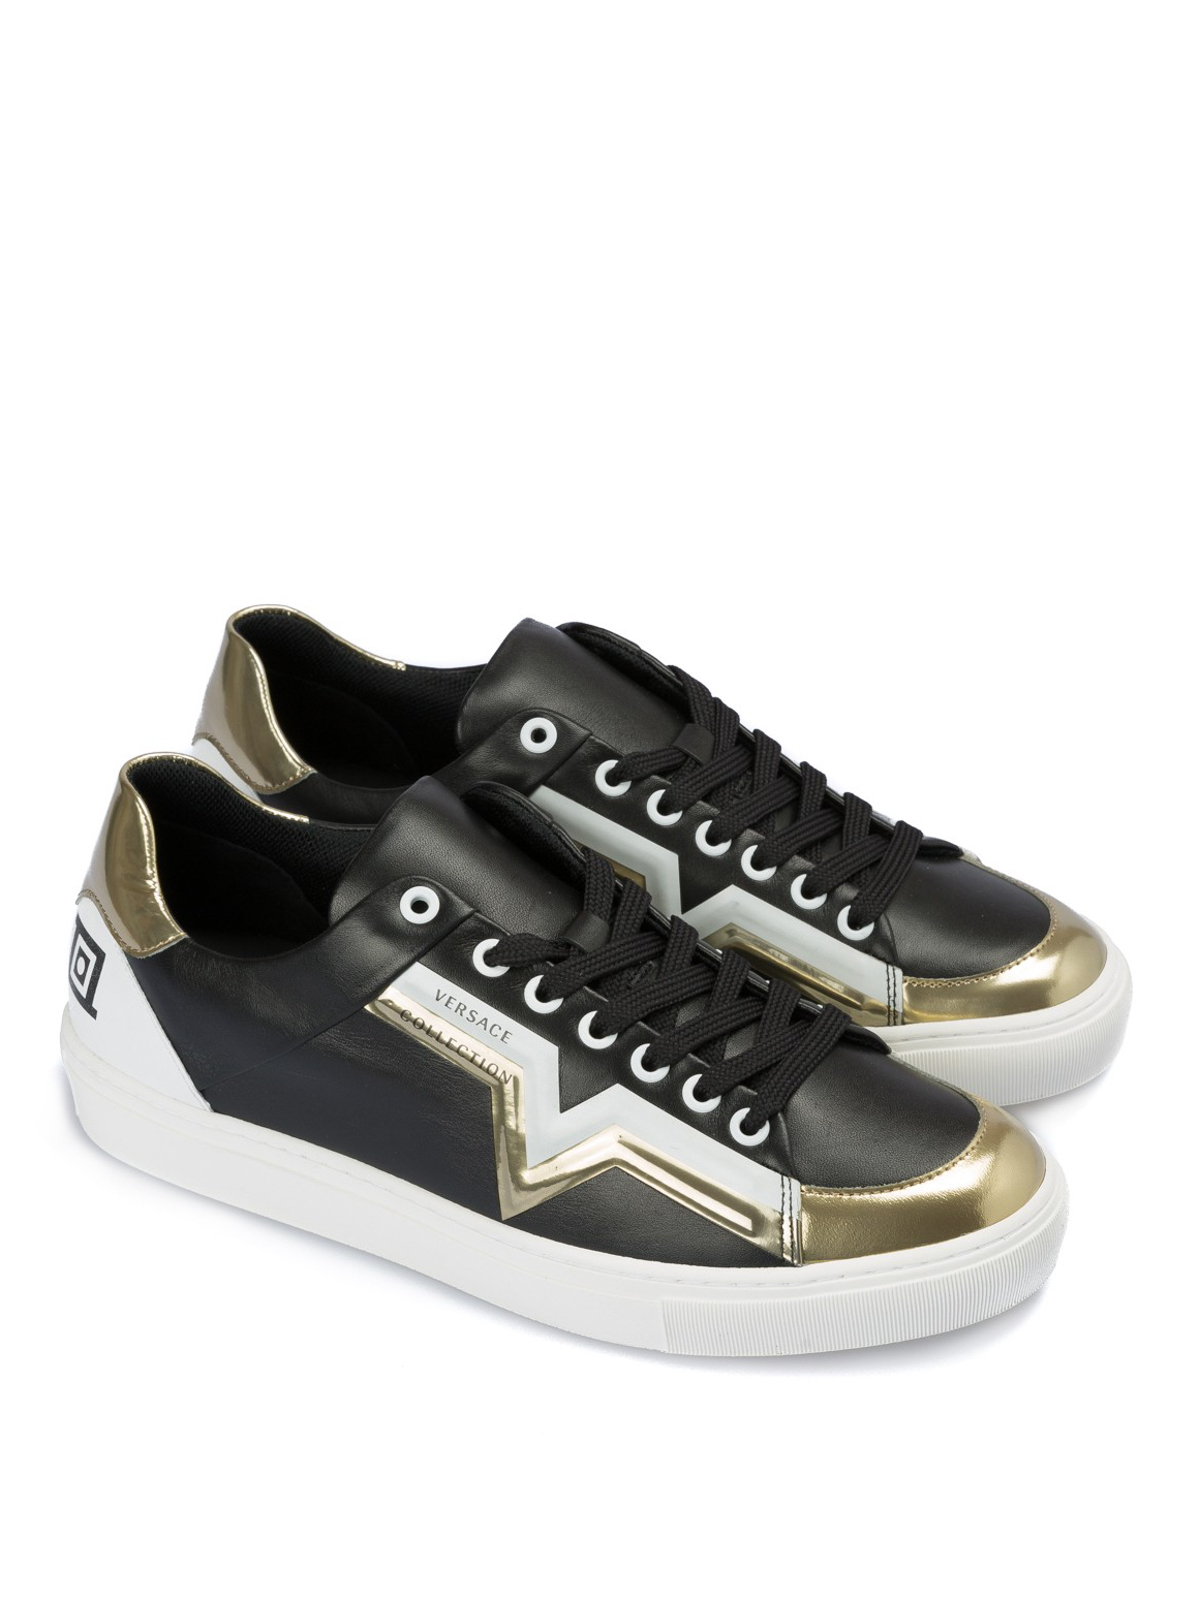 Versace Collection VM00318 Mens Fashion Sneakers 